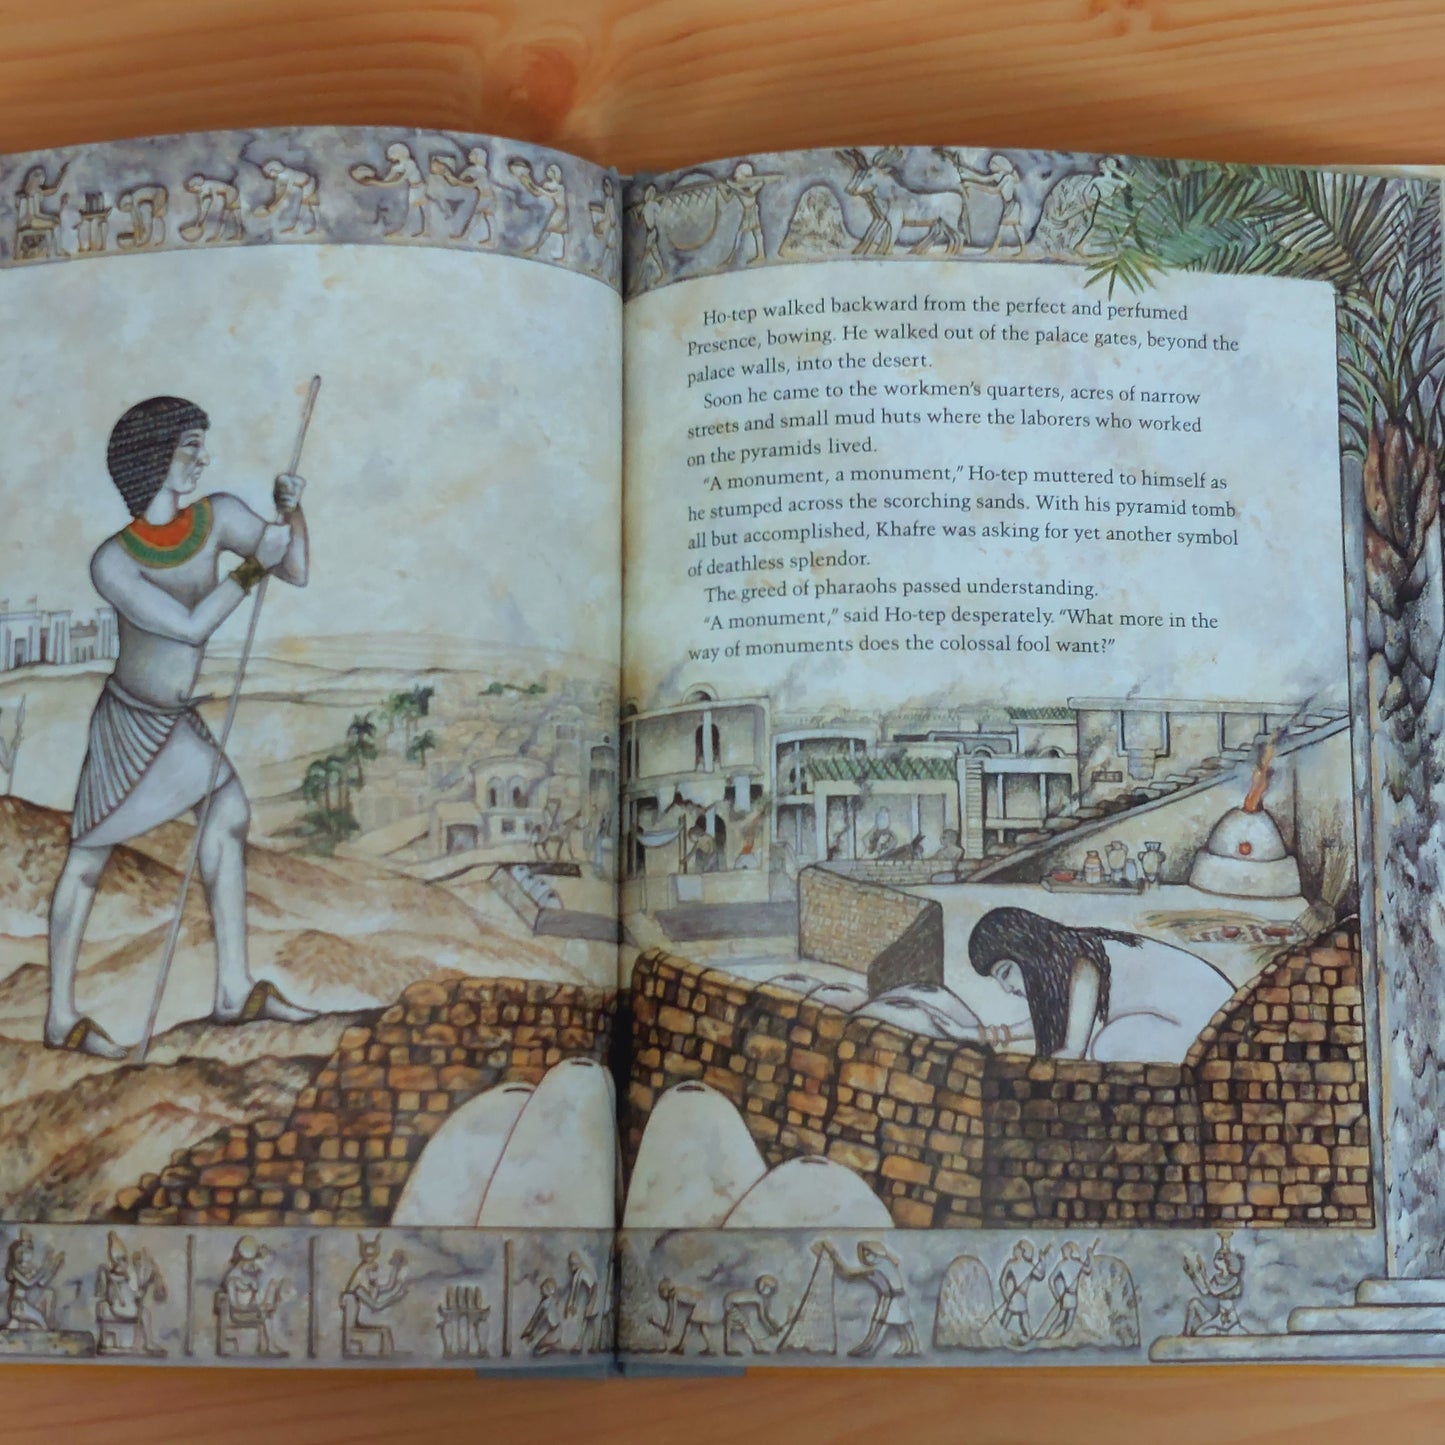 Zekmet - The Stone Carver (A Tale of Ancient Egypt)